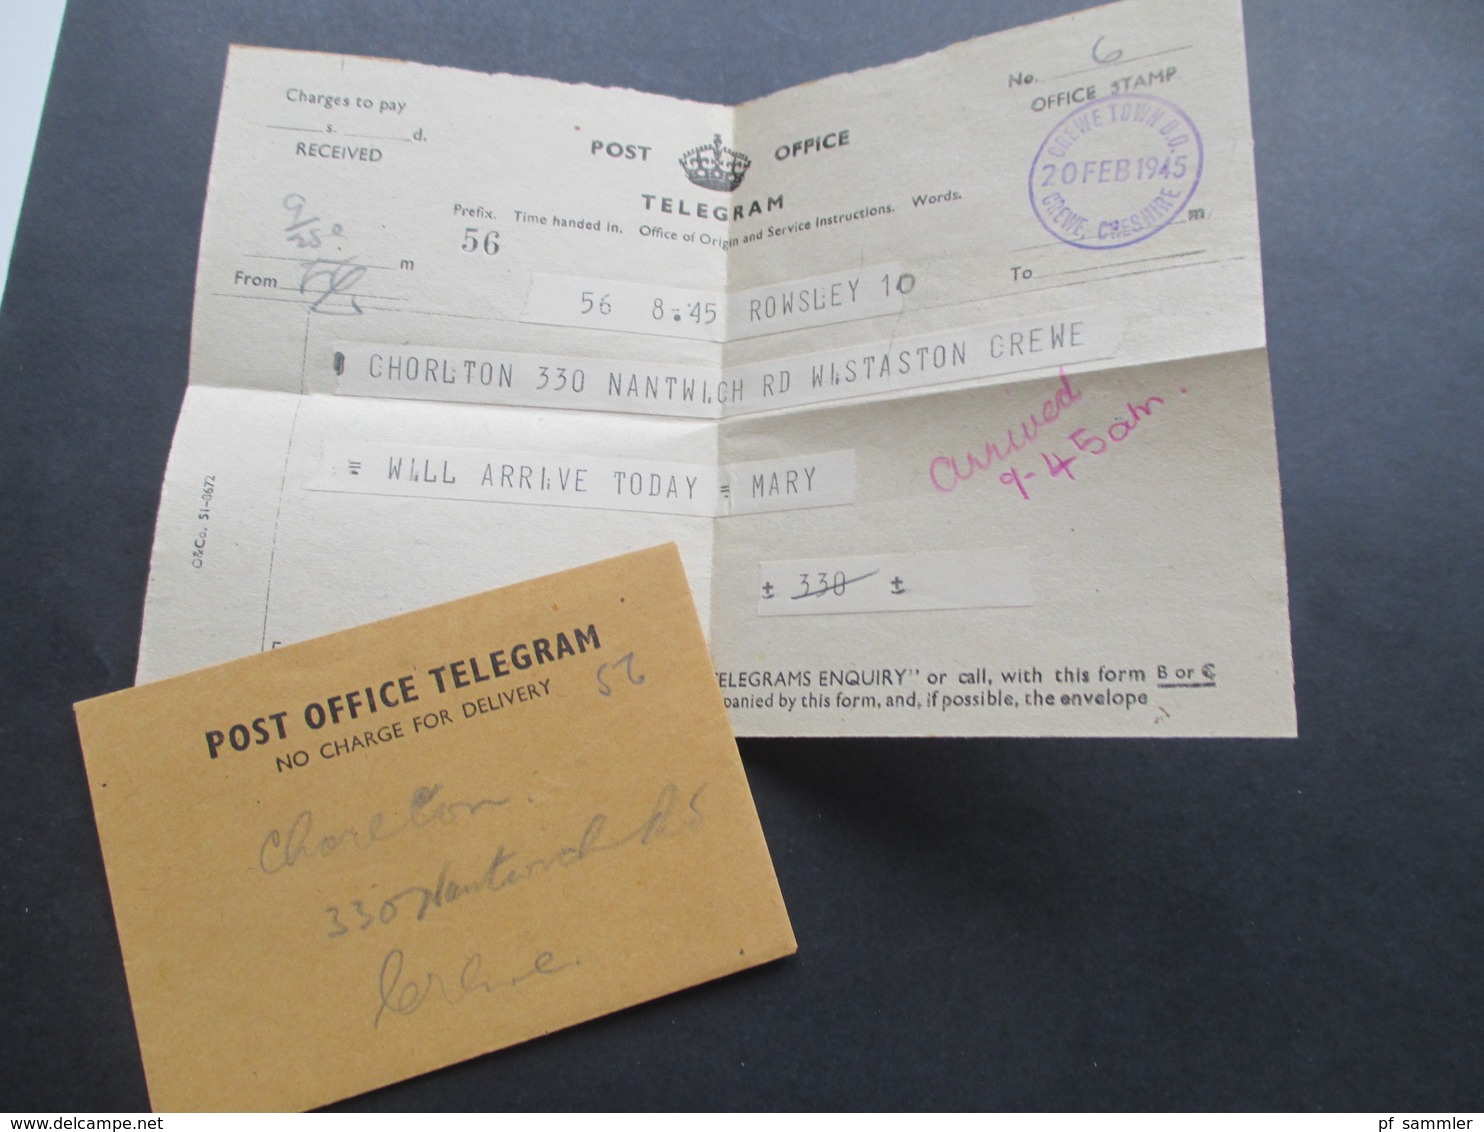 GB 20.Feb.1945 Post Office Telegram Mit Originalumschlag! Aus Rowsley / Crewe Town B.O. Crewe Cheshire - Covers & Documents